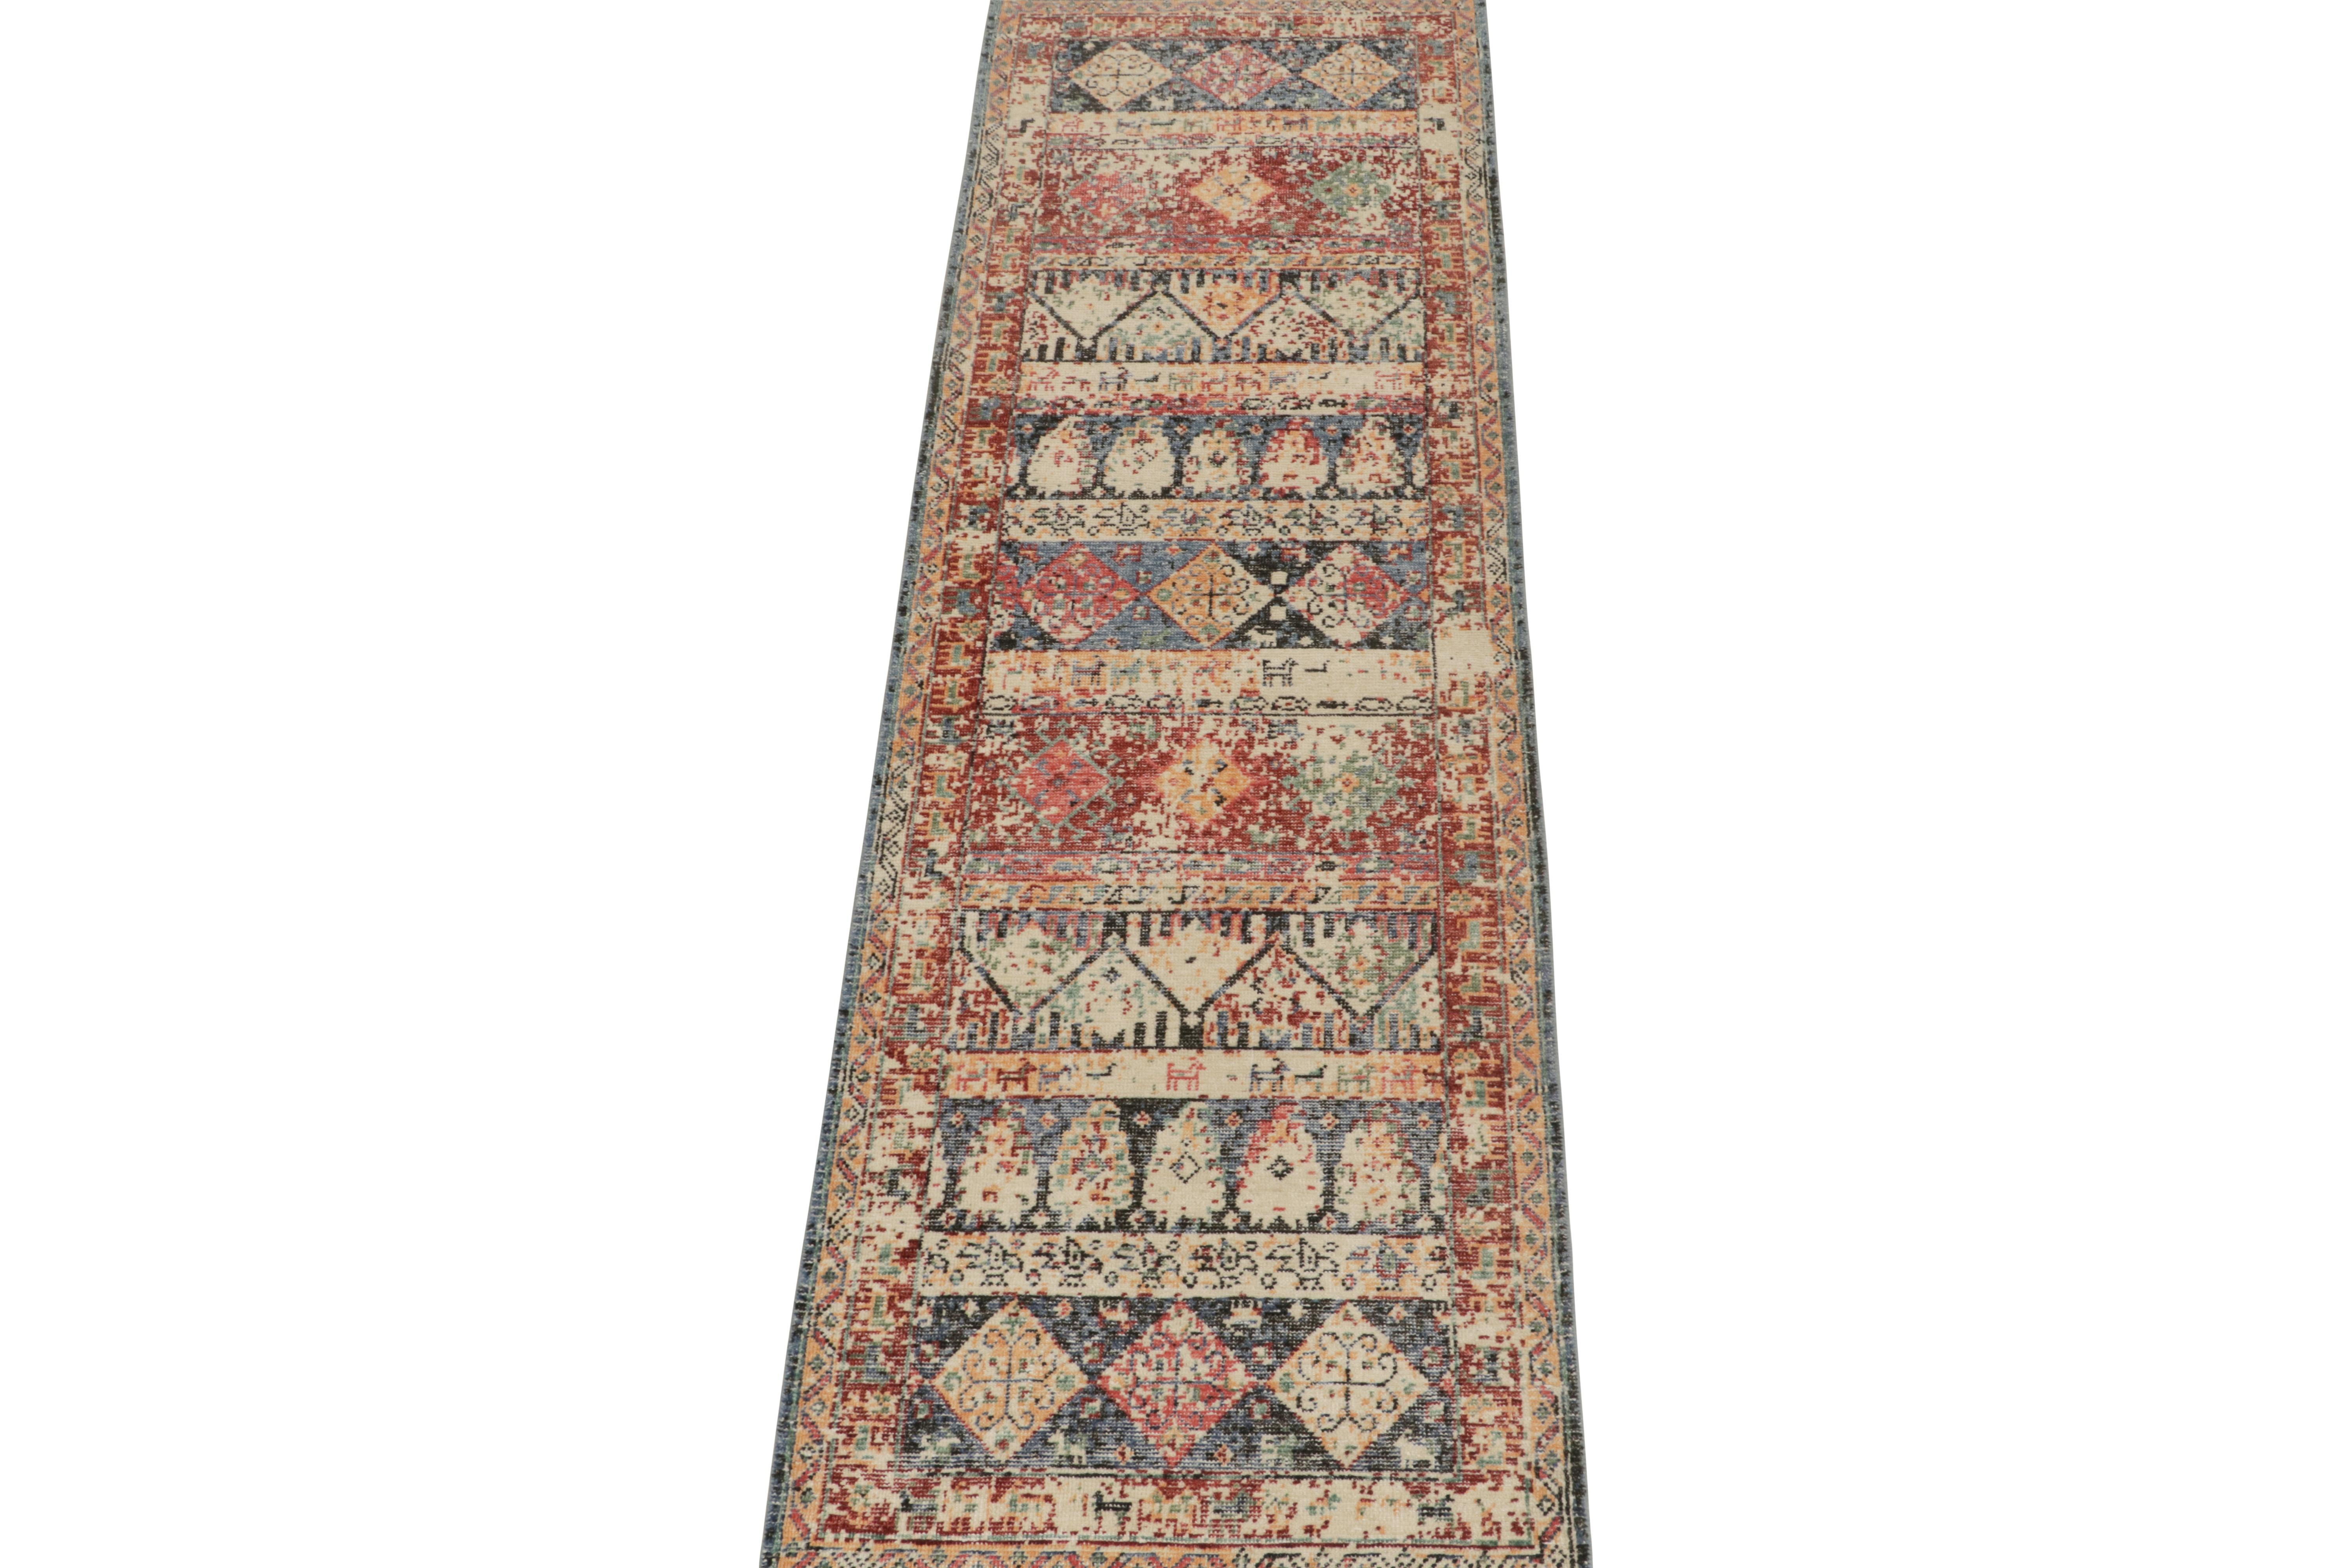 Indian Rug & Kilim’s Distressed Tribal Style Runner in Polychromatic Geometric Patterns For Sale